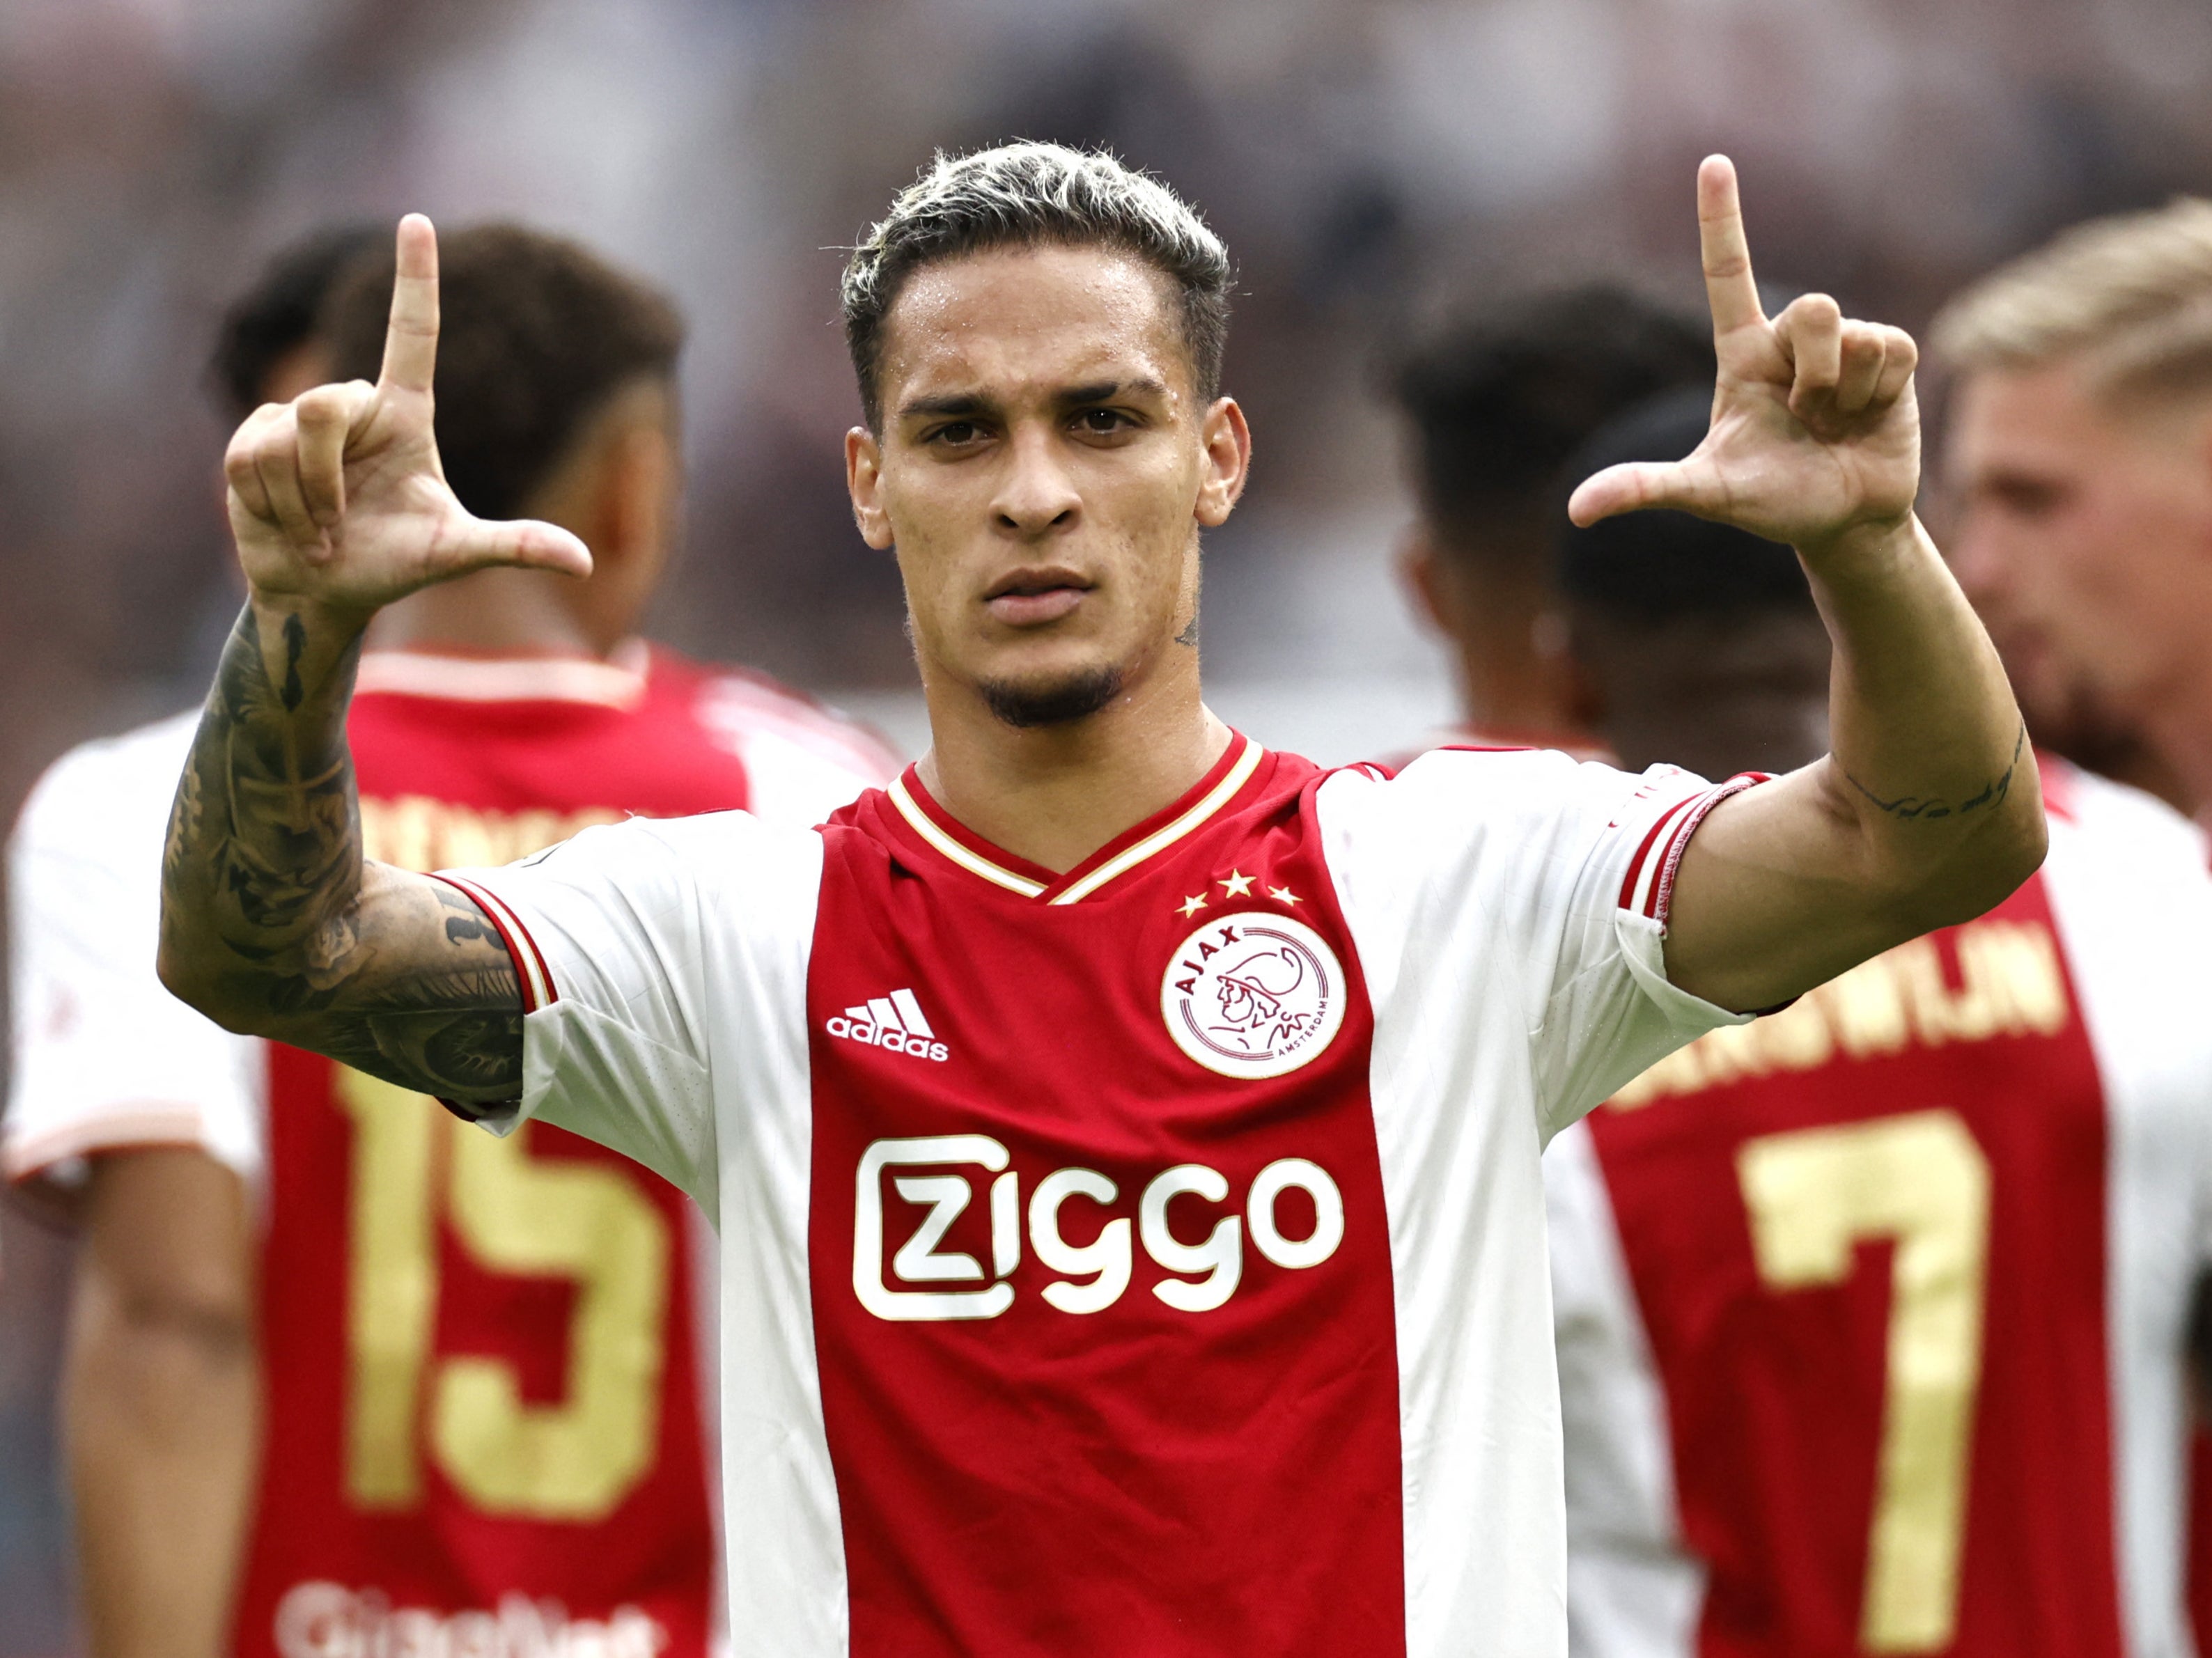 Ajax winger Antony is set to join Manchester United in a €100m deal